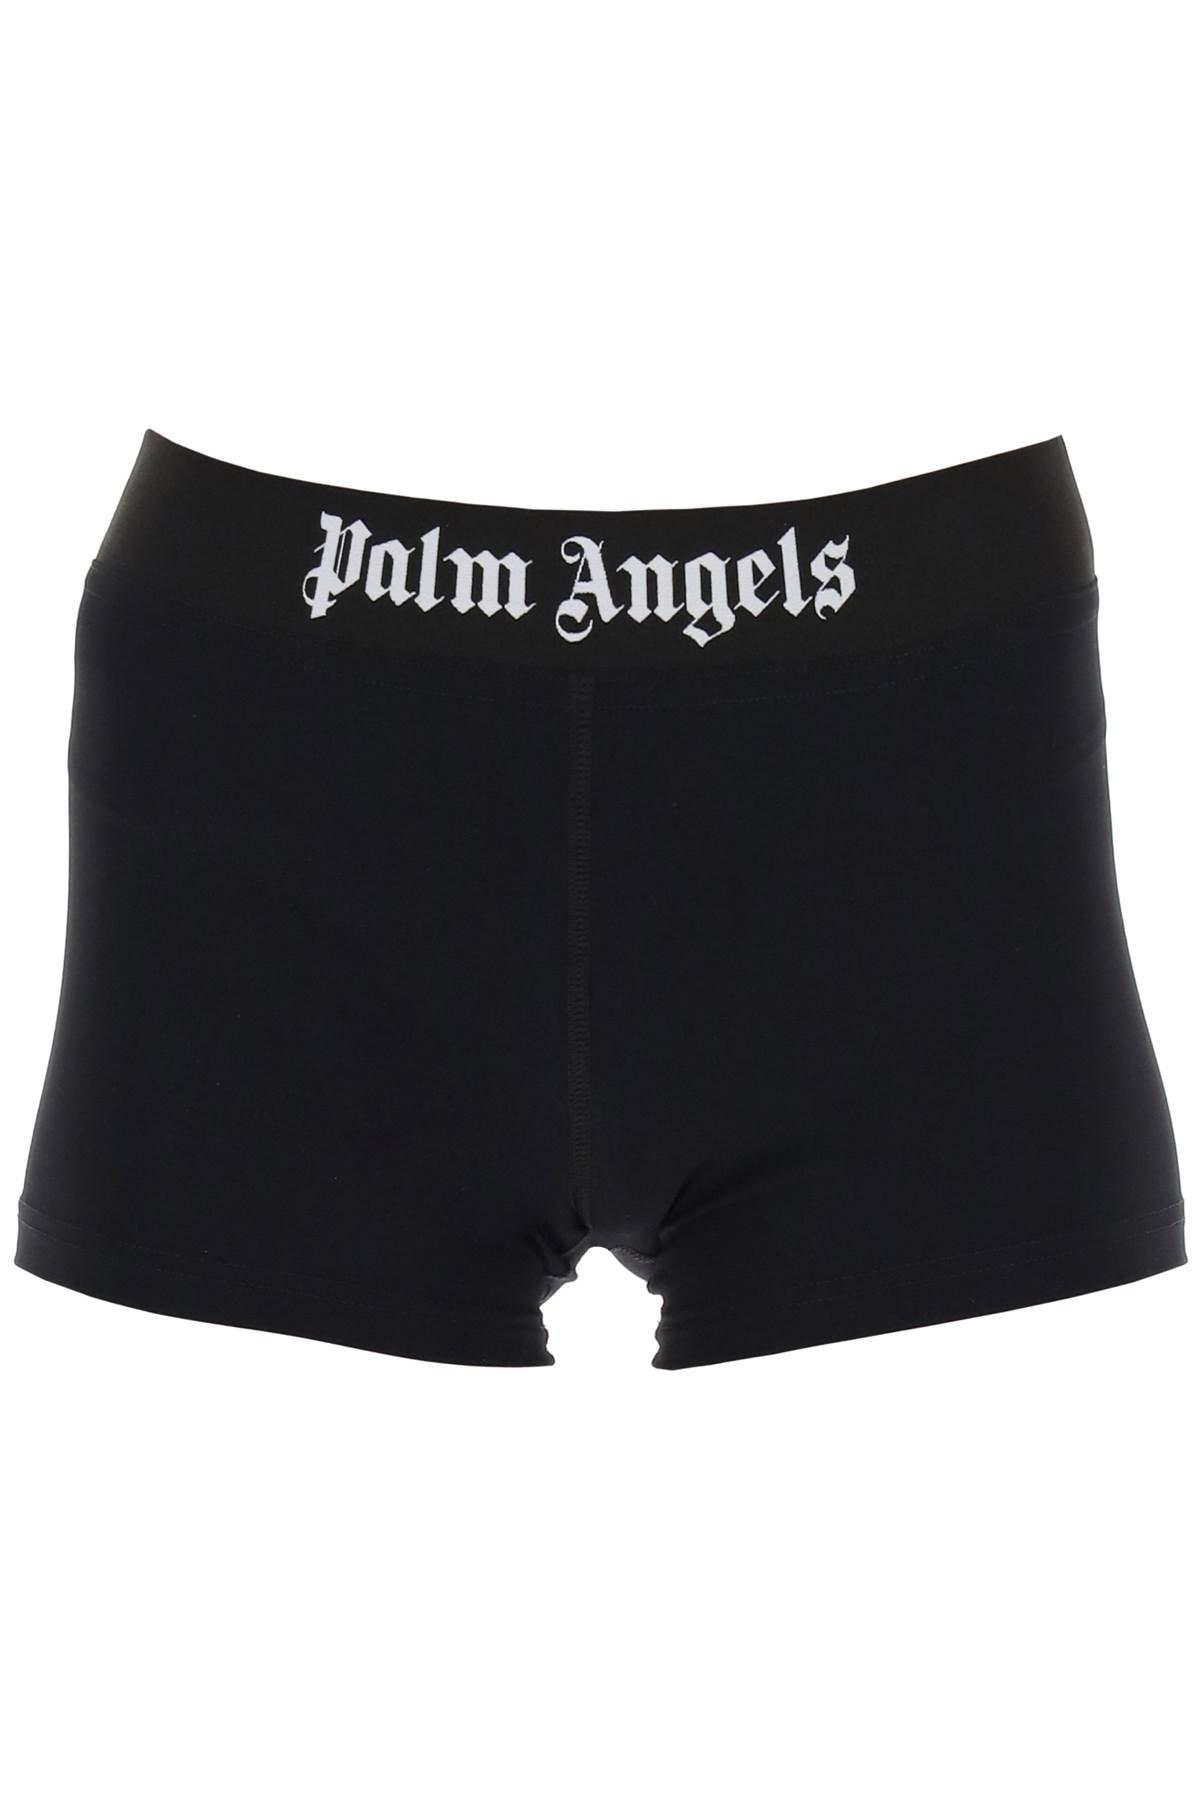 Palm Angels Sporty Shorts With Branded Stripe - JOHN JULIA